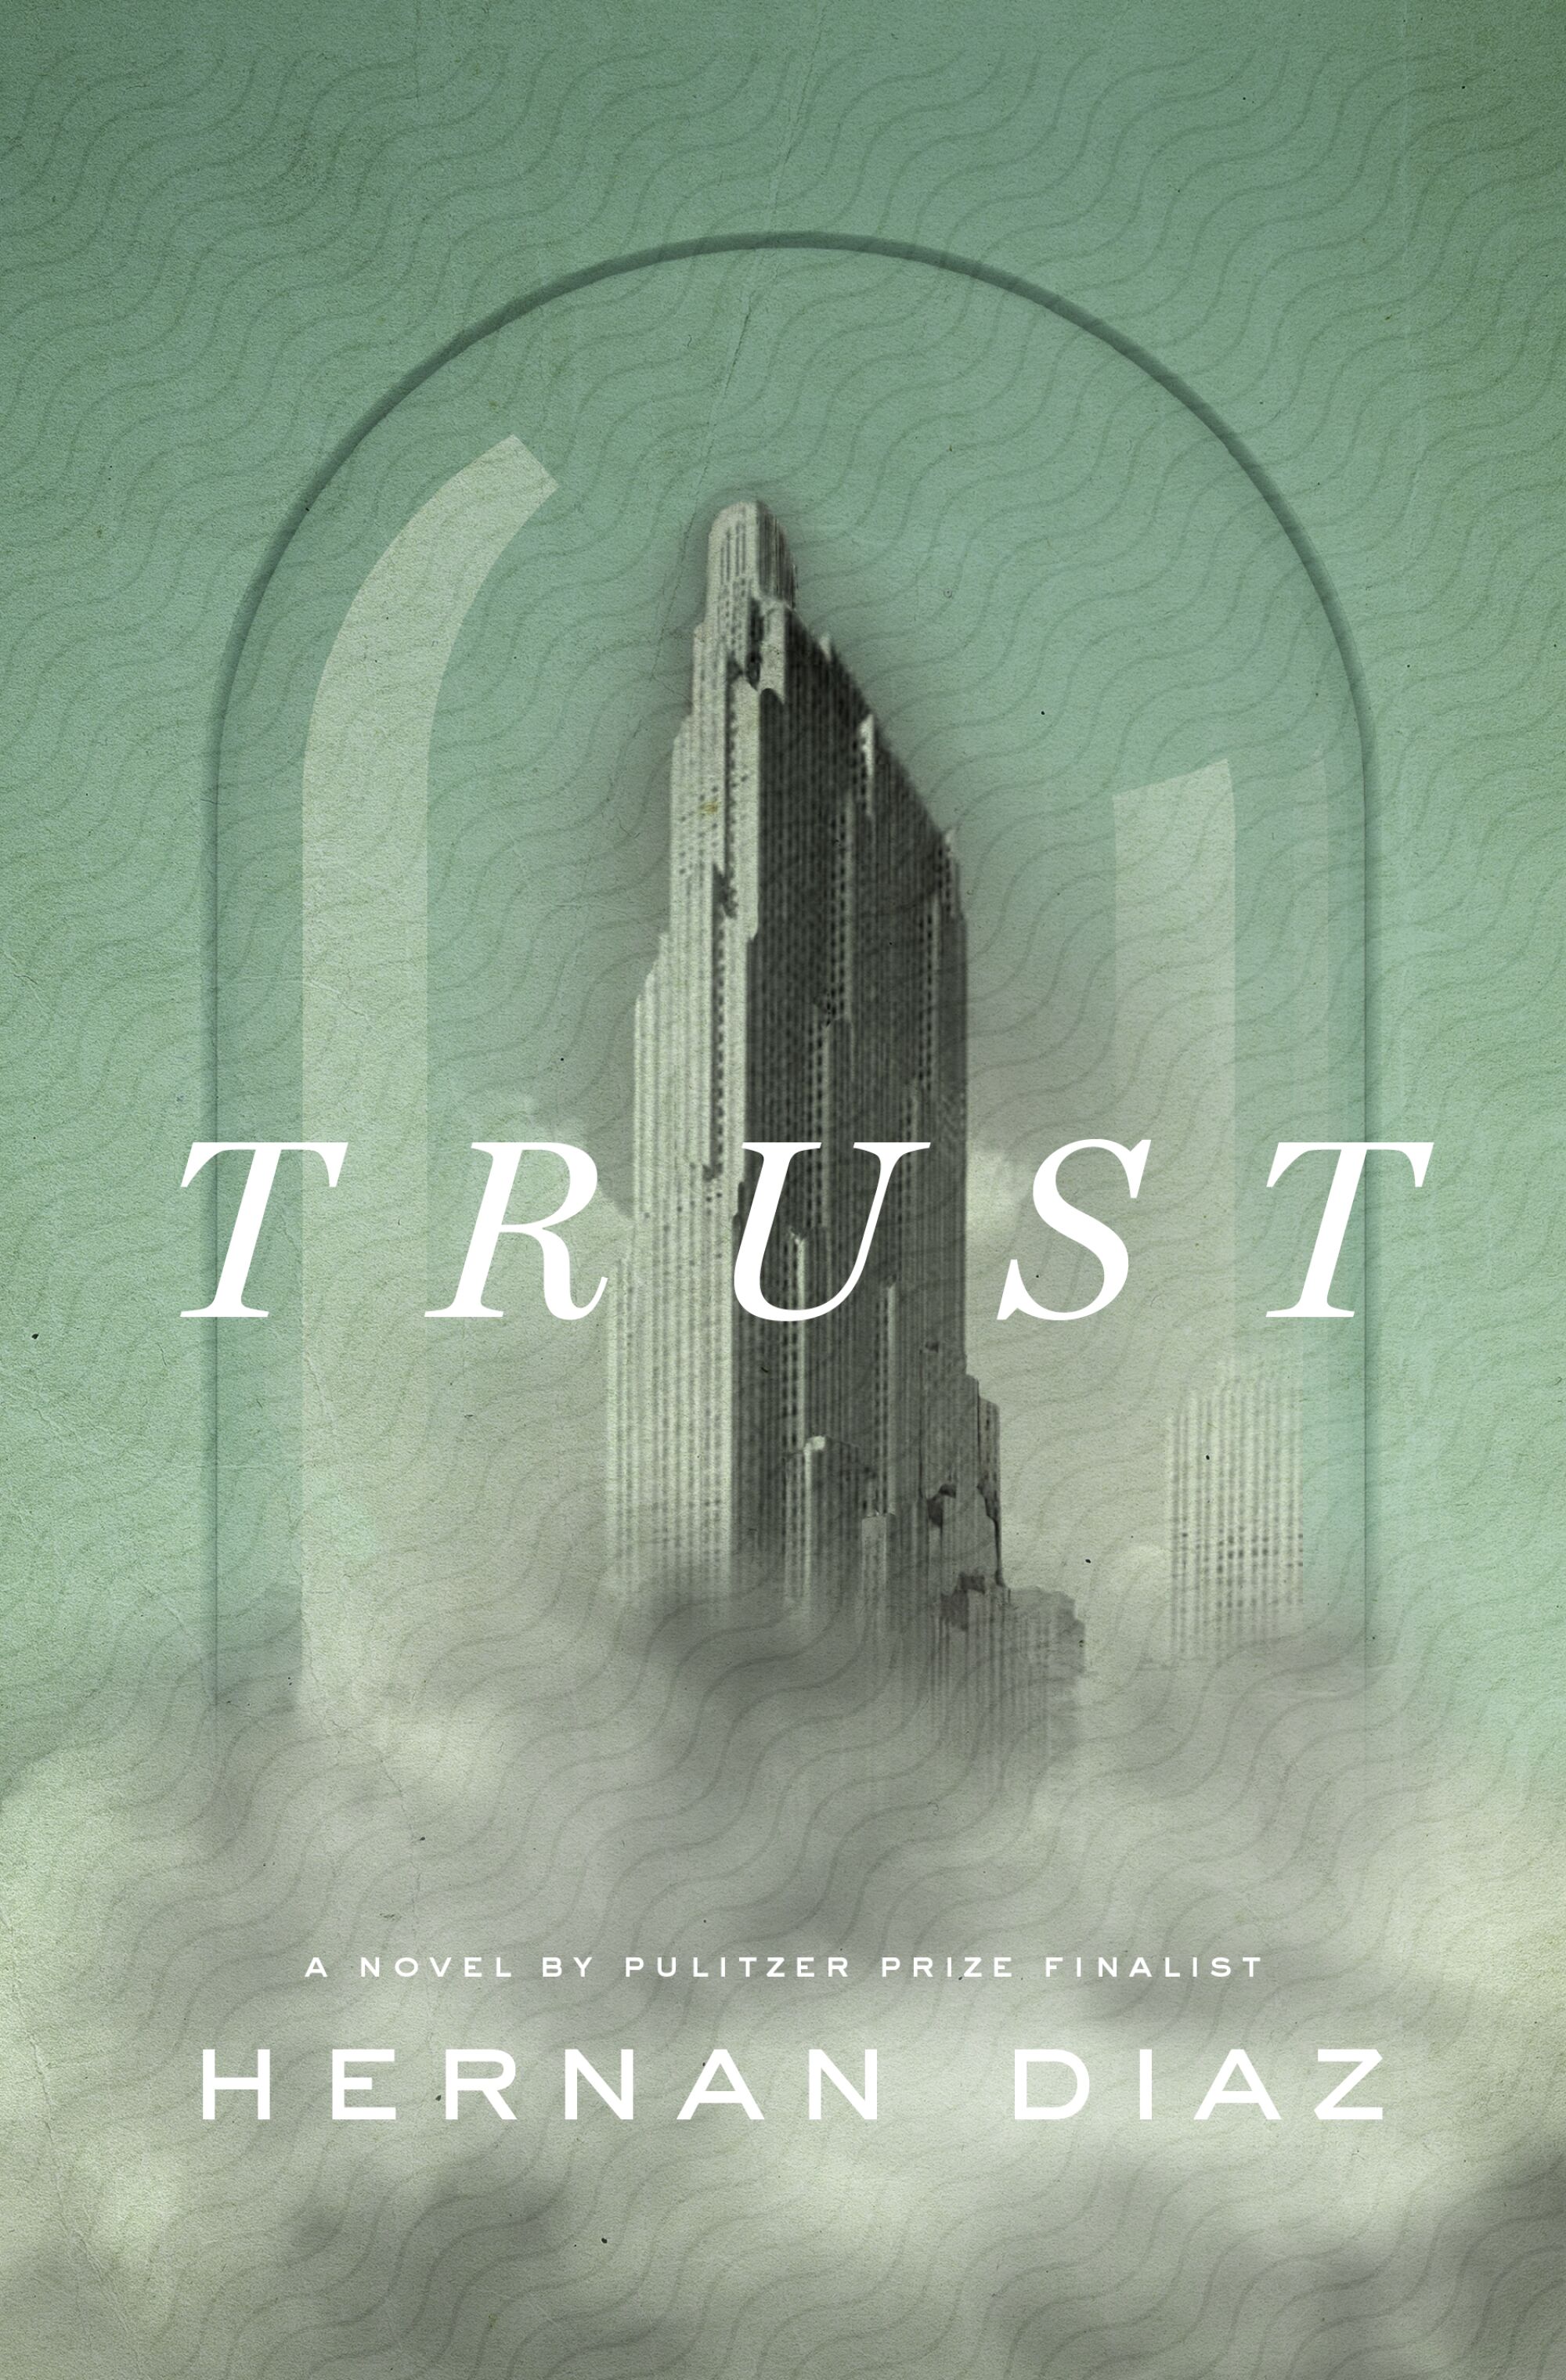 building under a glass case on cover of "Trust" by Hernan Diaz